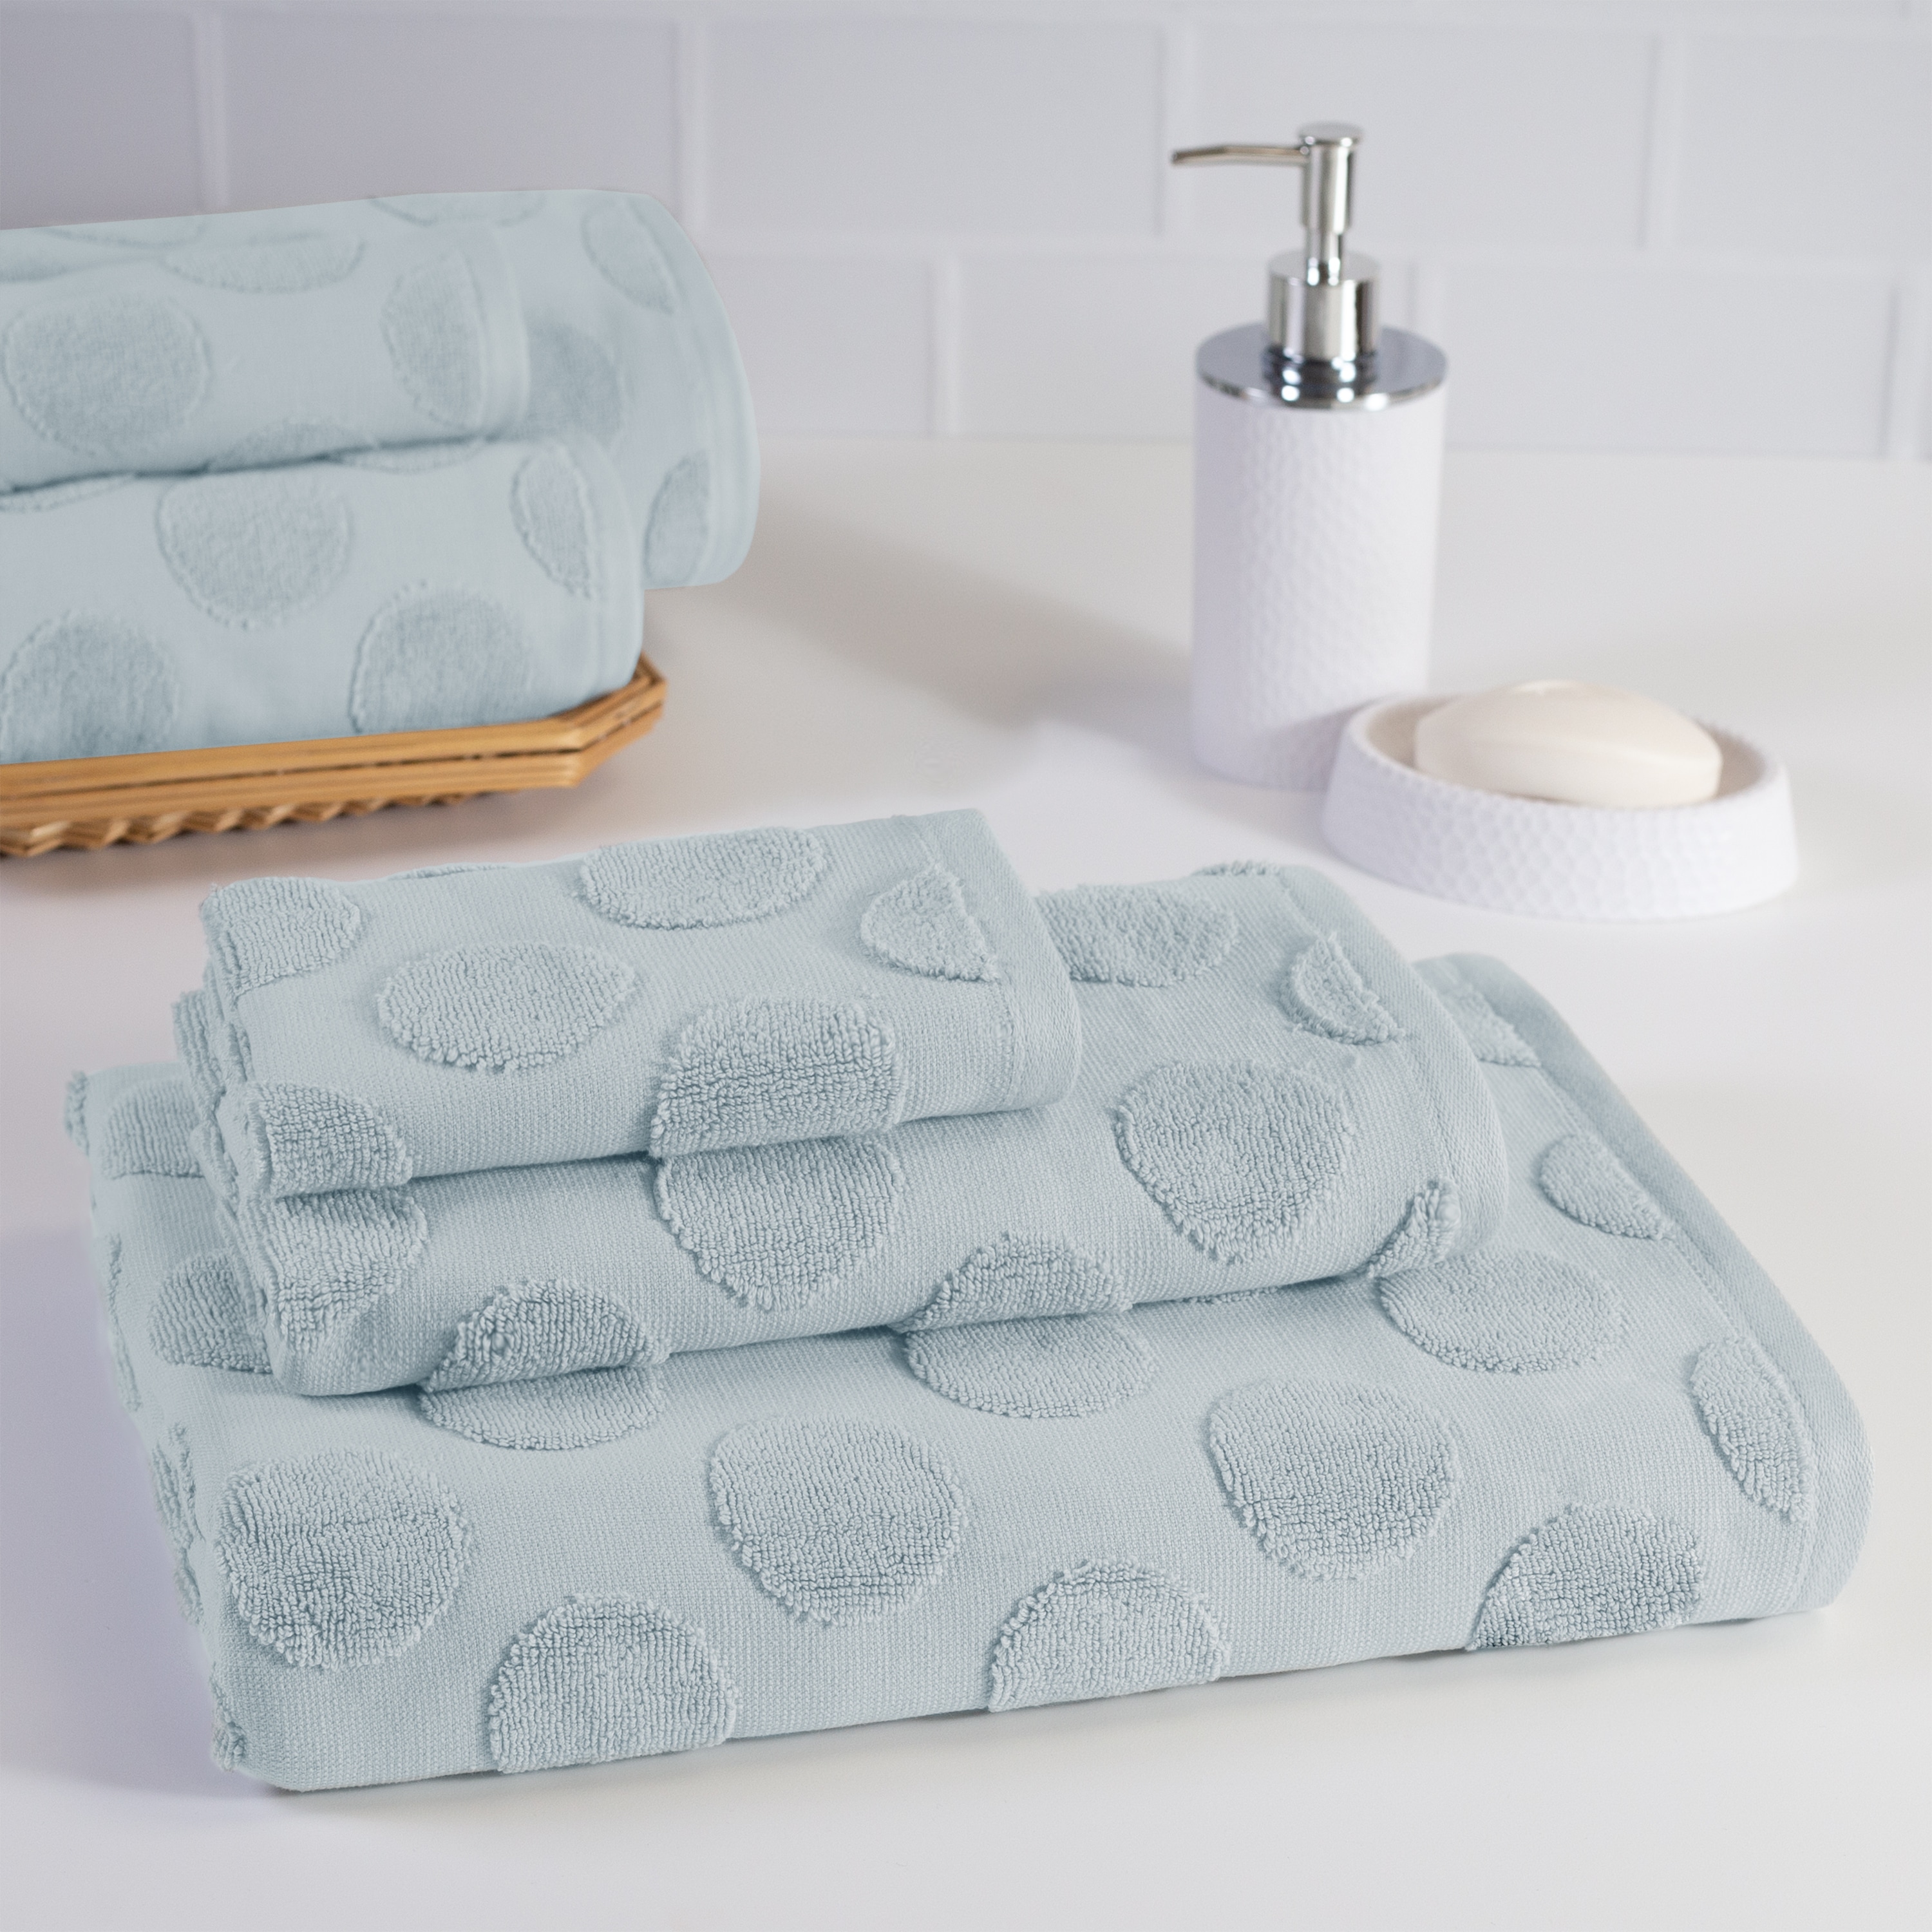 https://ak1.ostkcdn.com/images/products/is/images/direct/660b8a405df36d034e801af91eb0d4a3d17c1ad5/Sapphire-Resort-Textured-Circles-6-Piece-Bath-Towel-Set-in-White.jpg